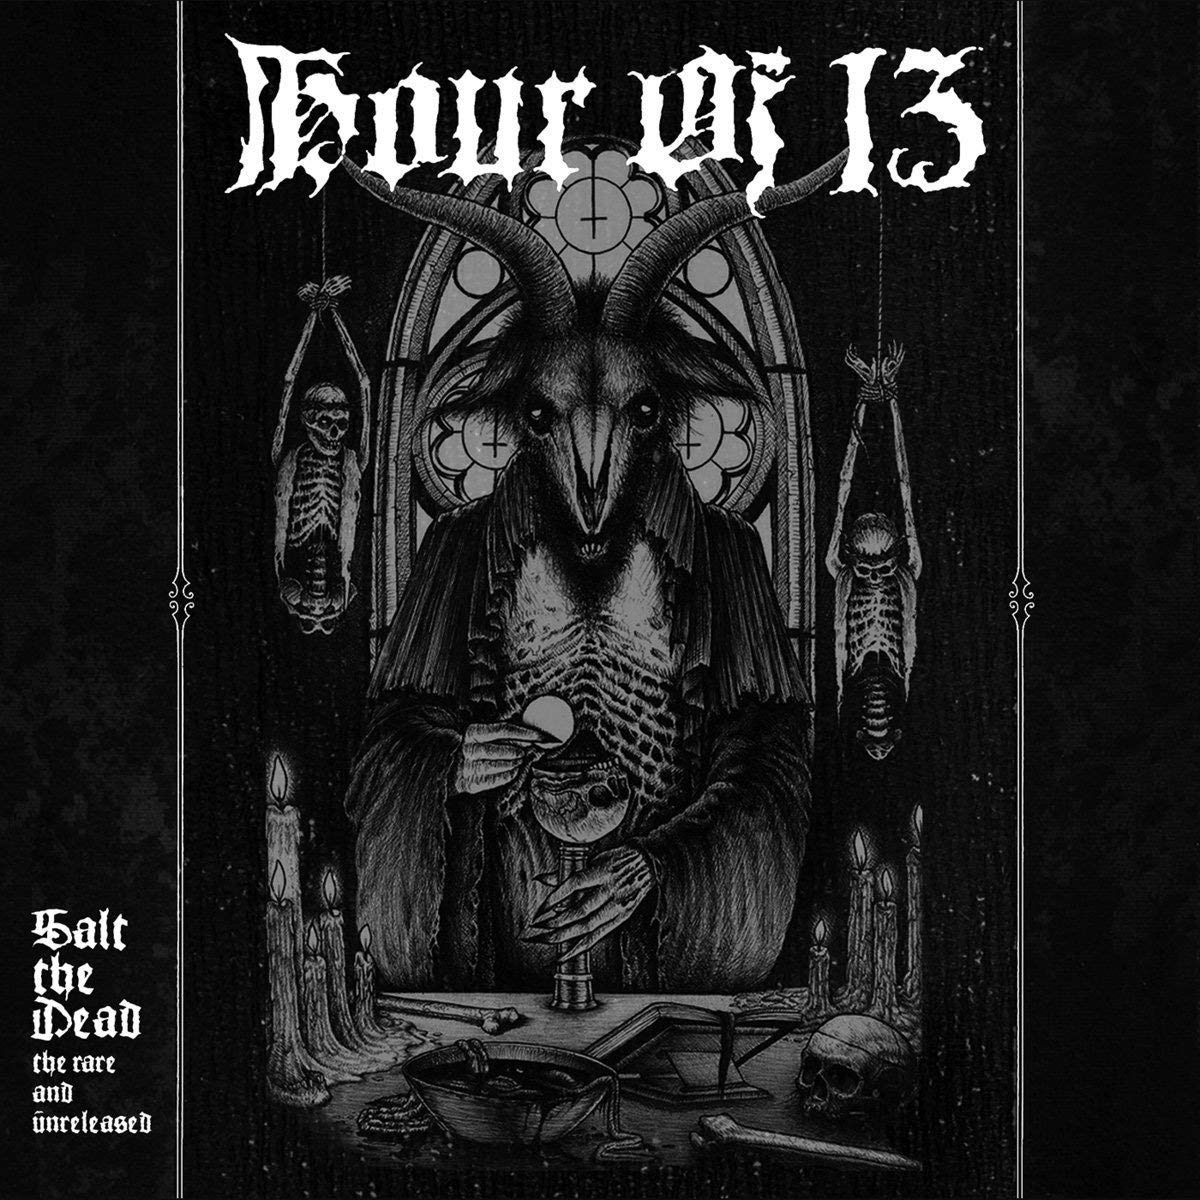 Hour Of 13 "Salt The Dead: The rare And Unreleased" 2x12" Vinyl